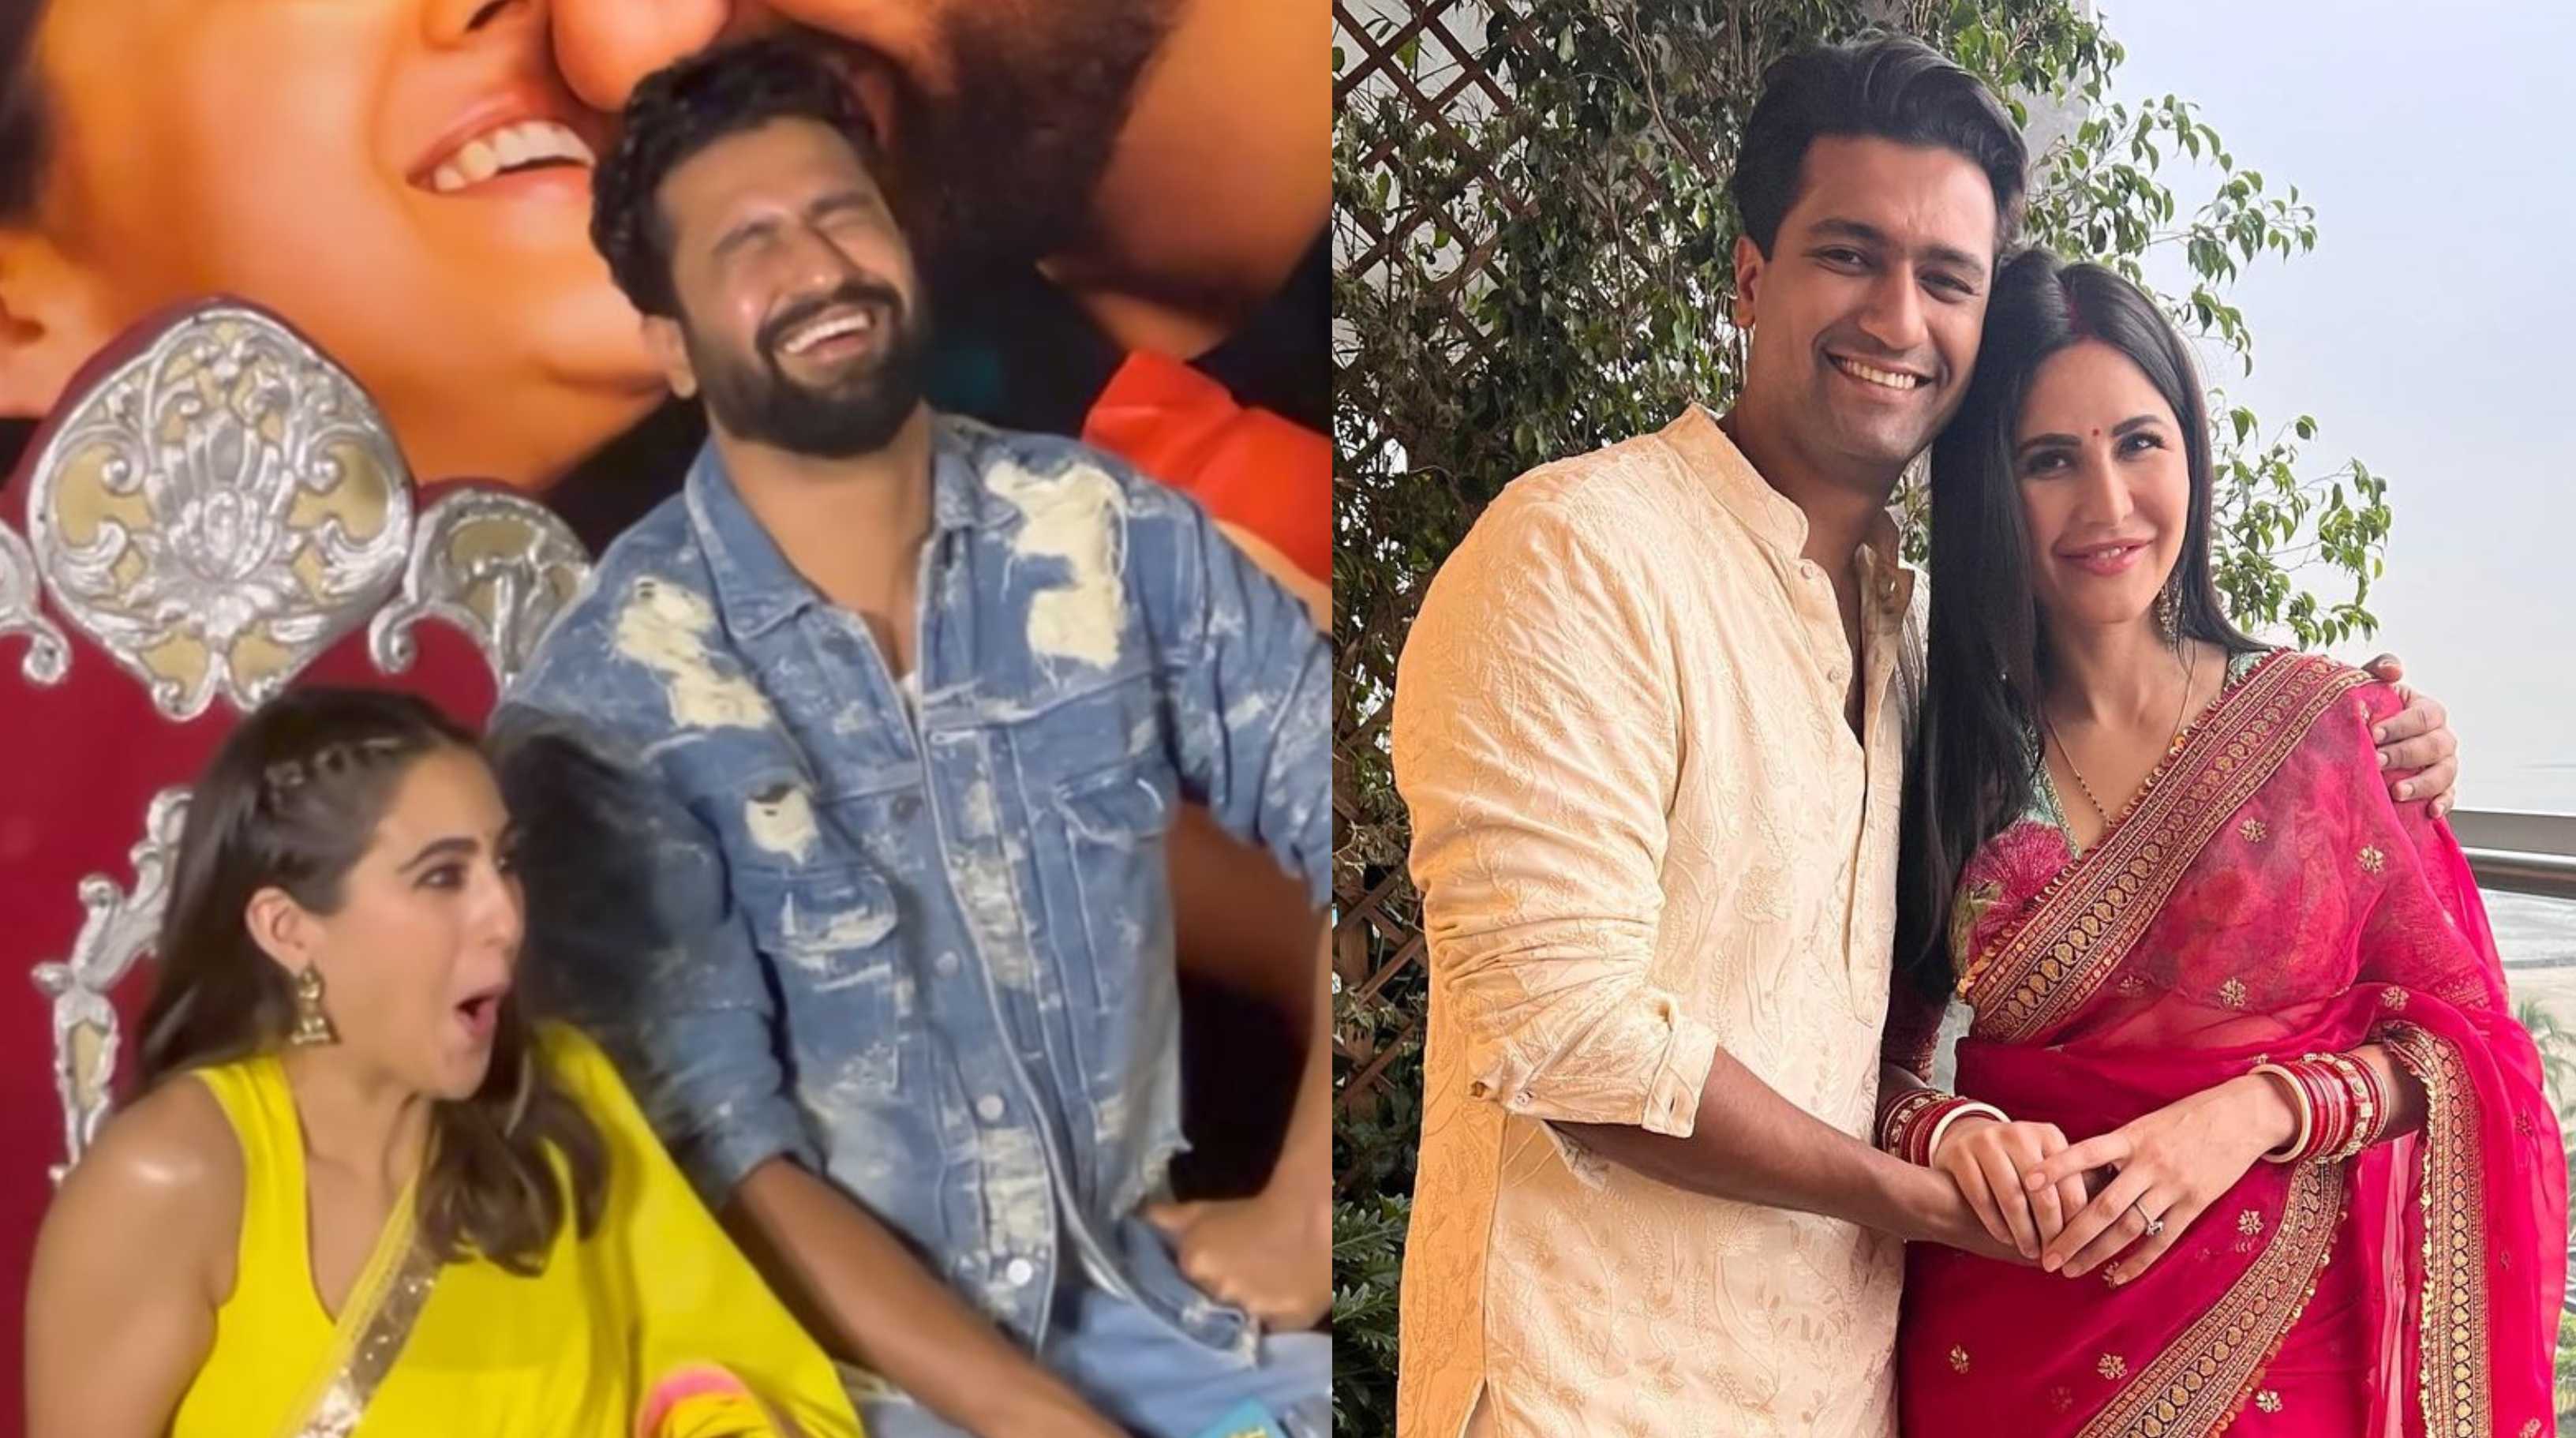 ‘Janmo janmo tak’: Vicky Kaushal’s reply about leaving Katrina Kaif for someone better is winning the internet; watch